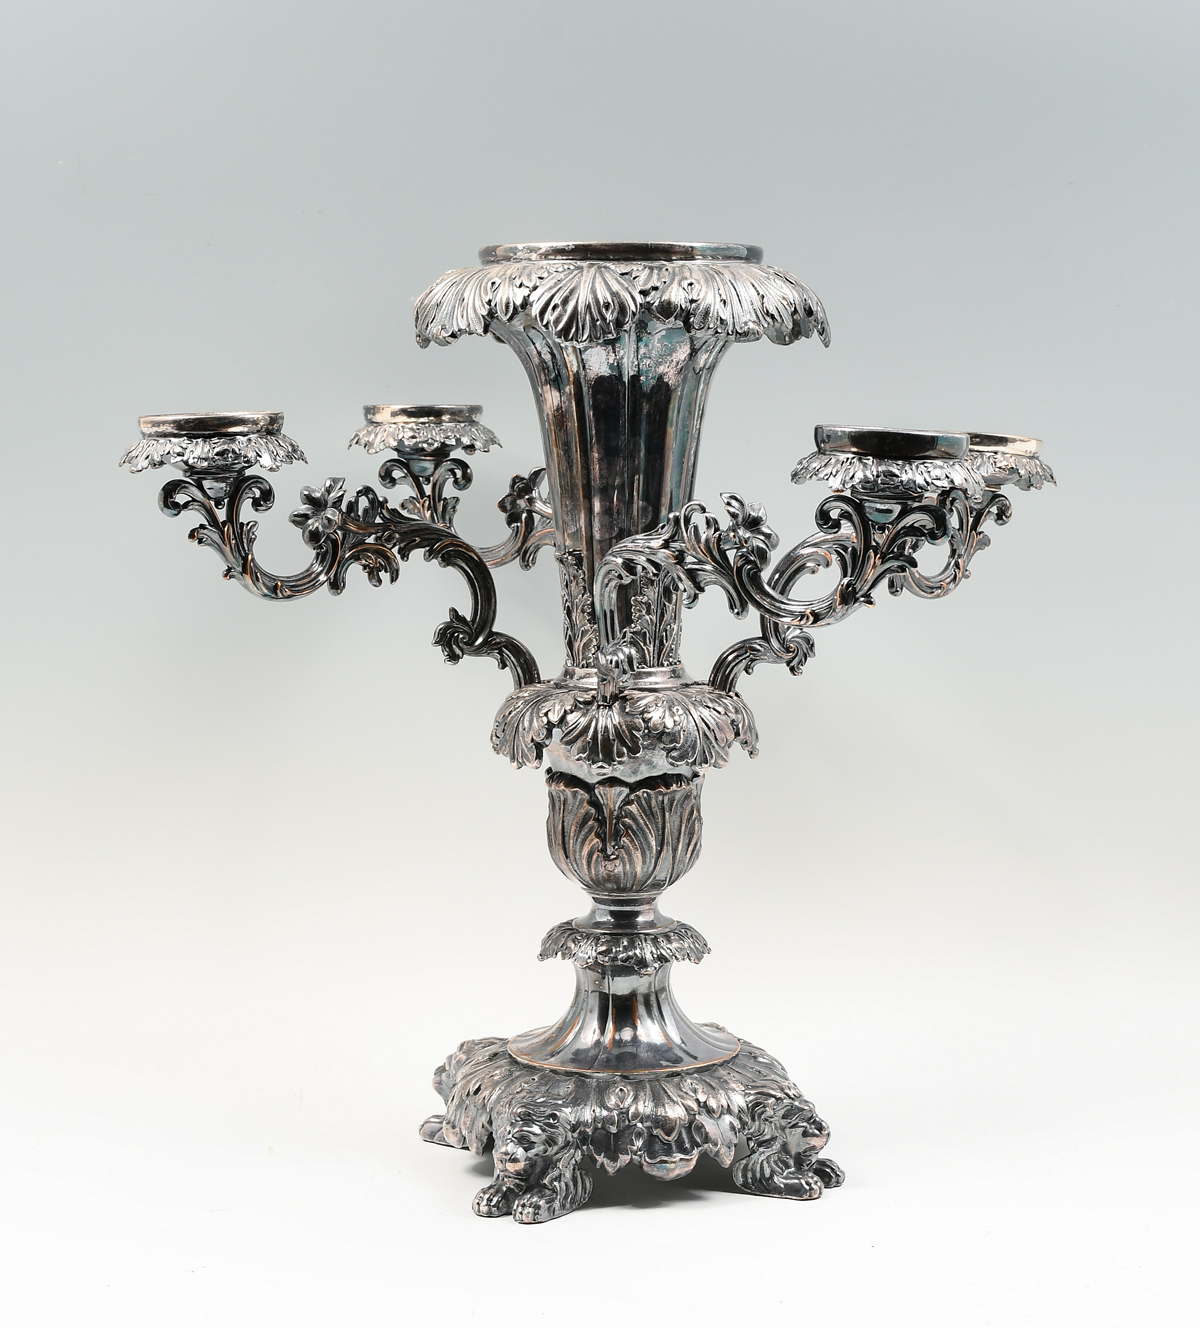 HIGHLY ORNATE SILVERPLATED EPERGNE  36a1b6